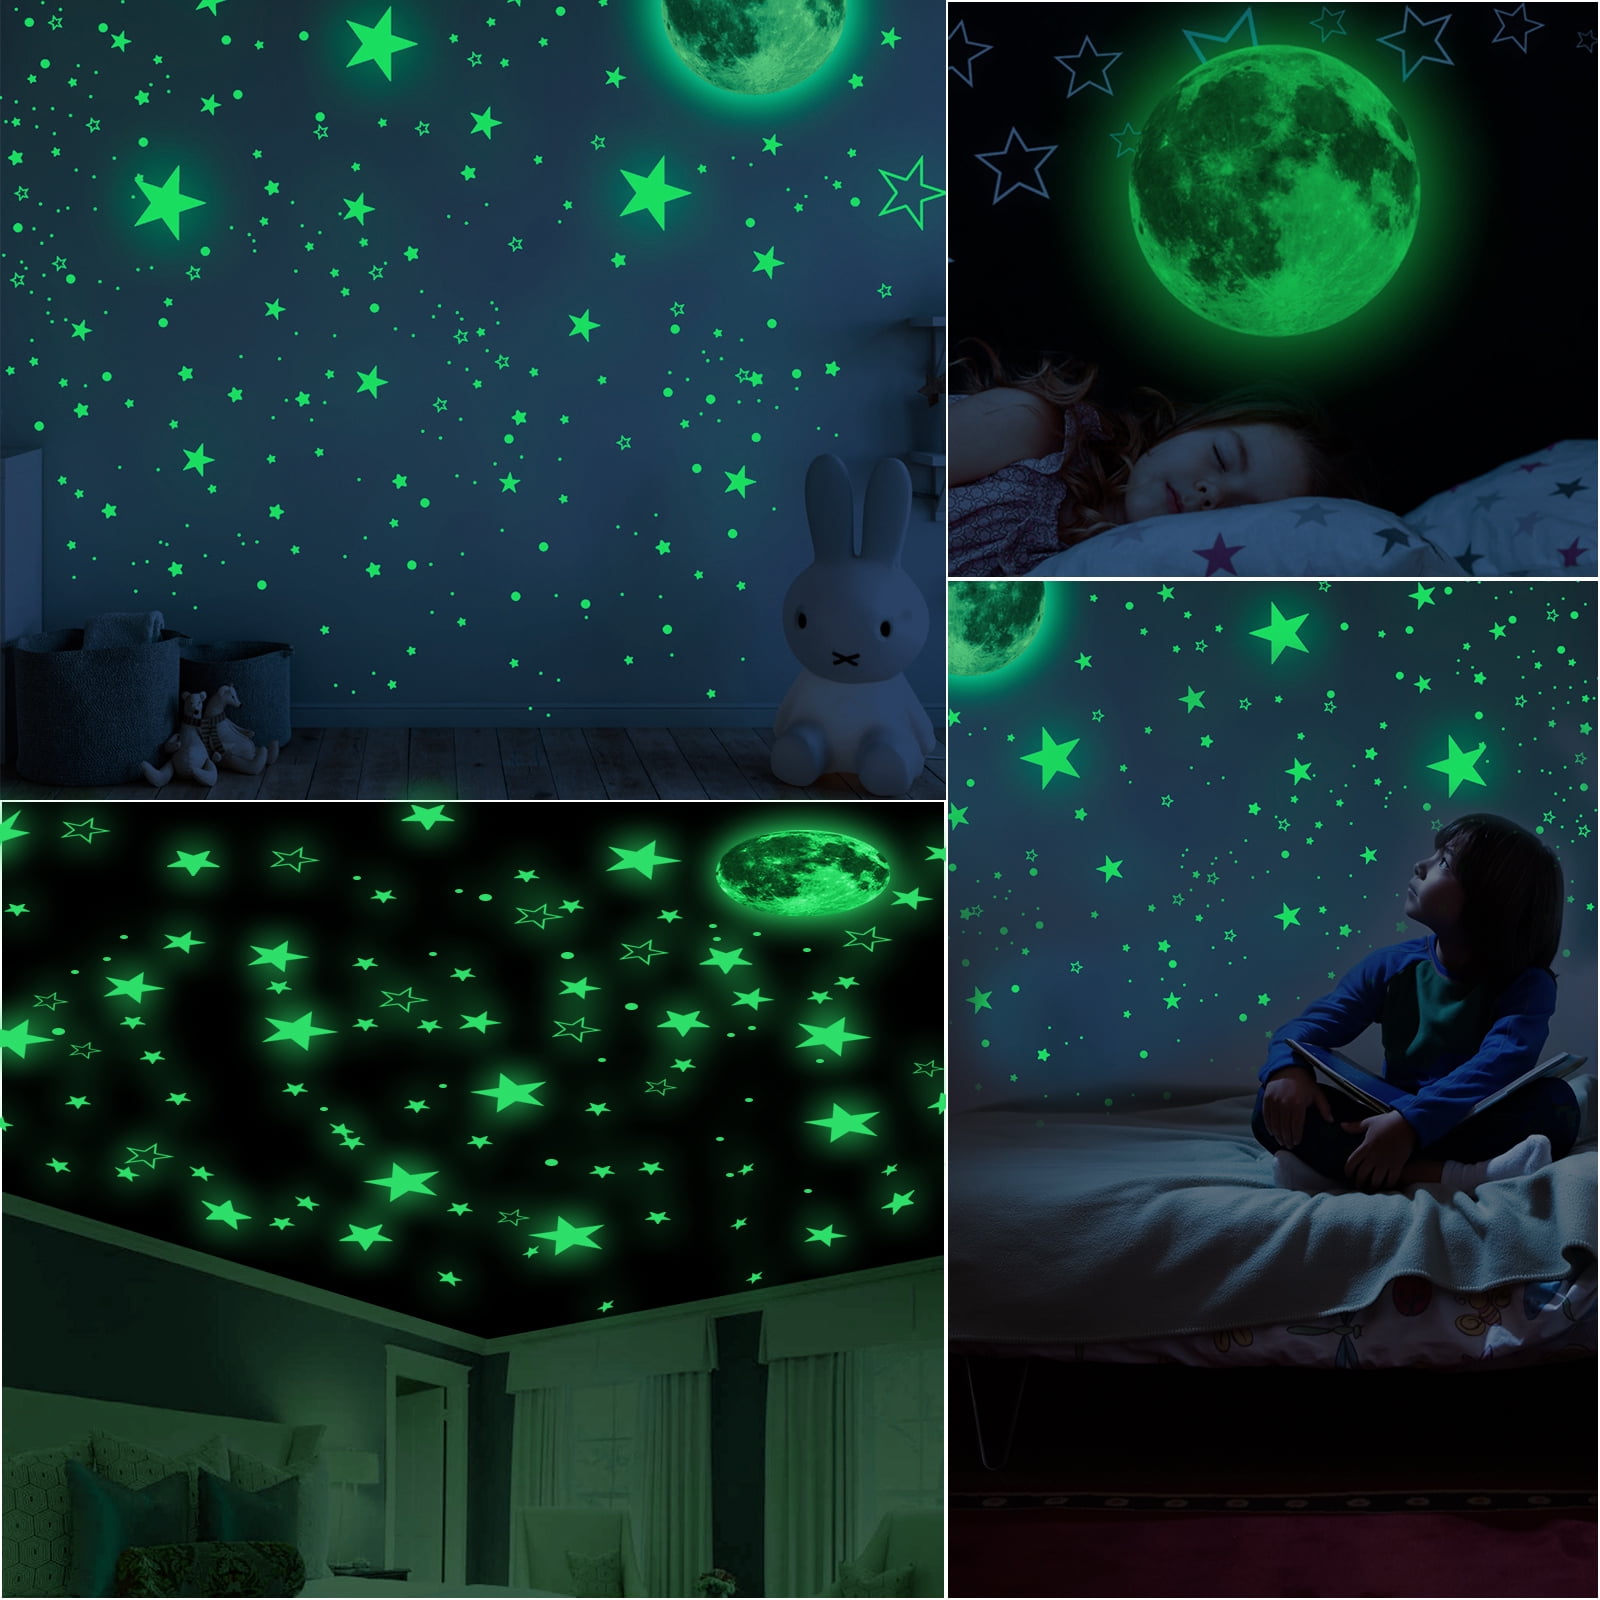 Glow in the Dark Full Moon and Star Wall Sticker Bedroom Ceiling 402pcs 